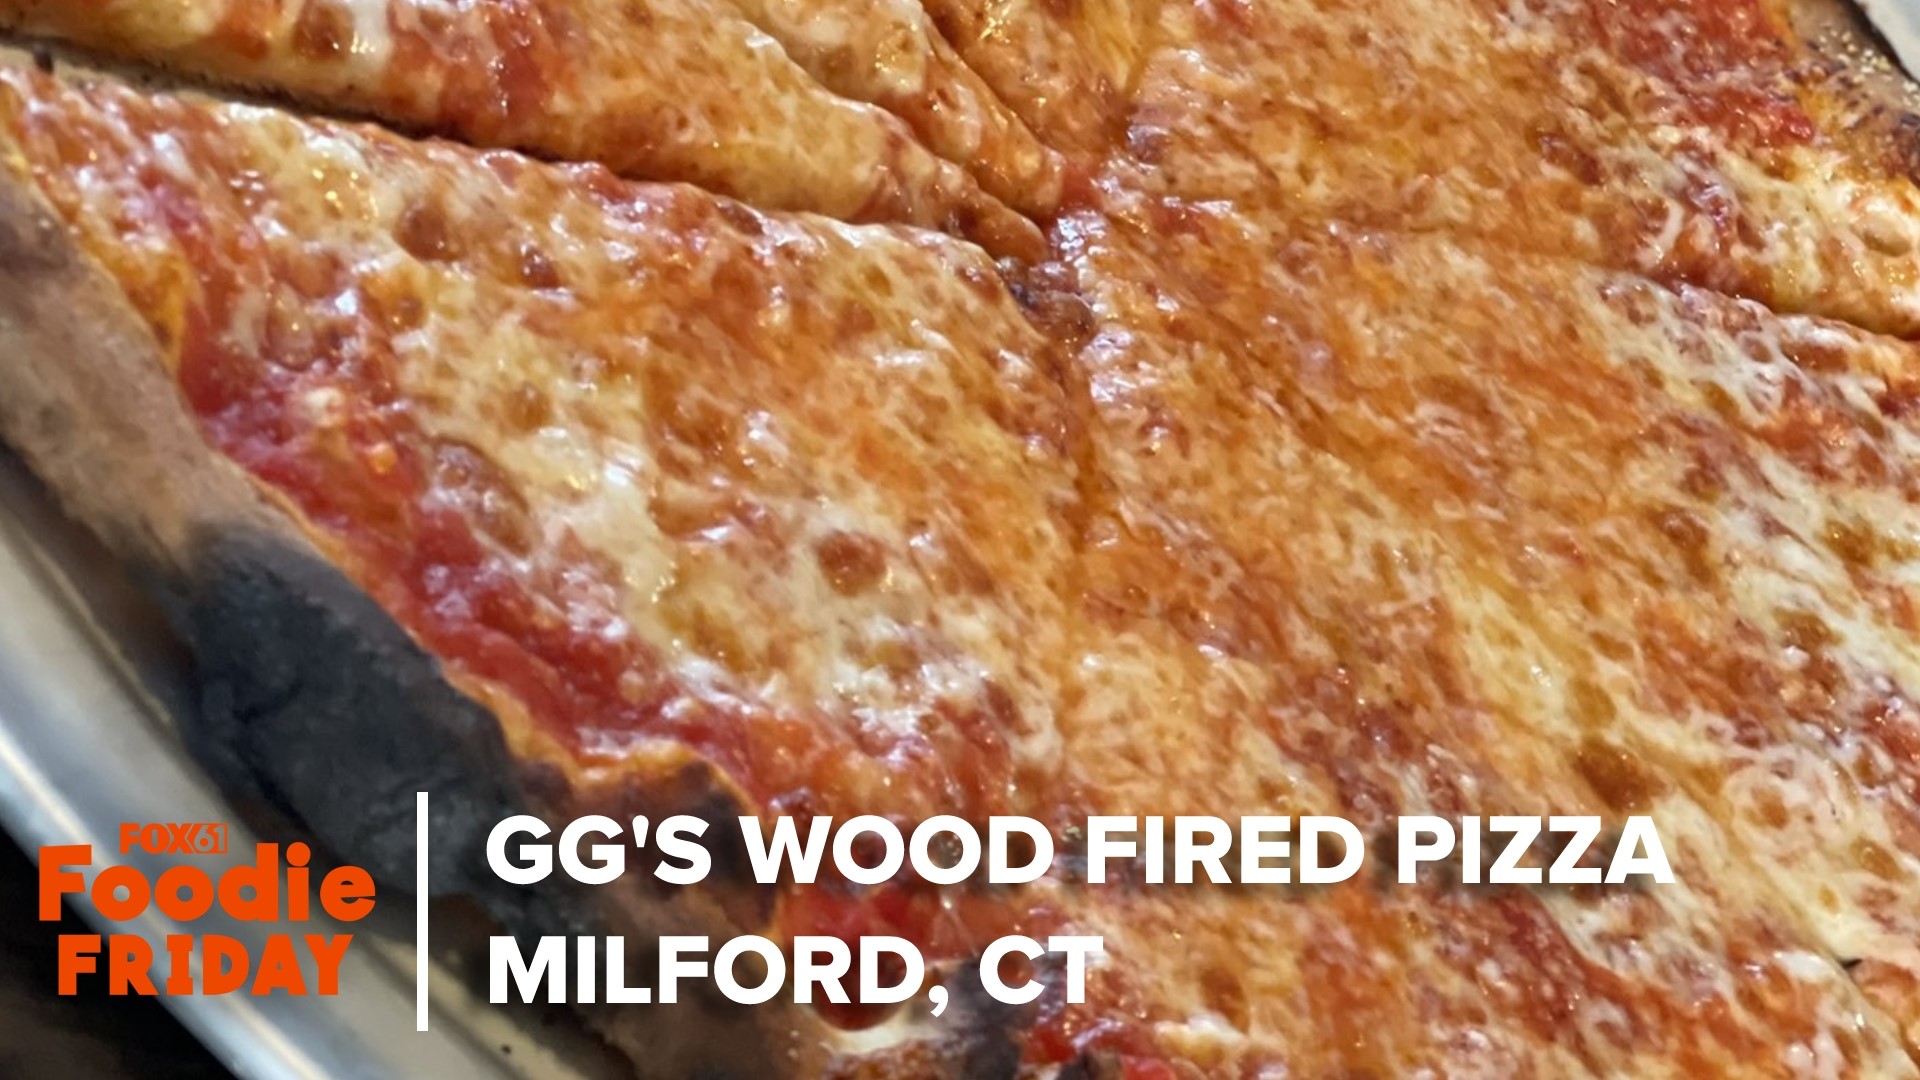 FOX61's Sean Pragano visits GG's in Milford for wood-fired pizza and more!